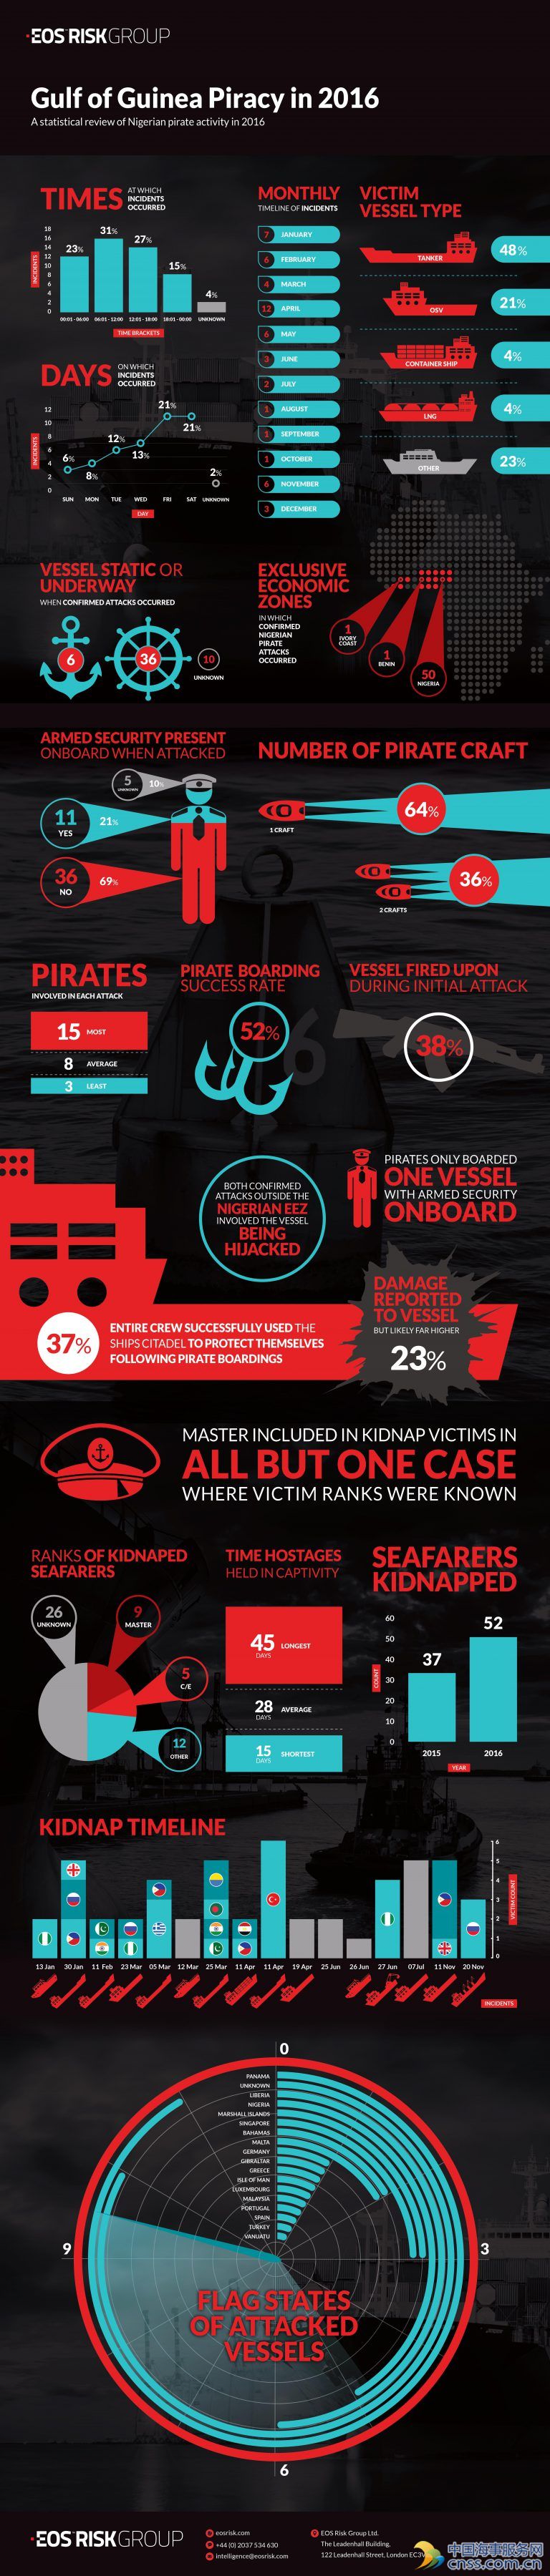 Infographic: Nigerian Pirate Activity in 2016